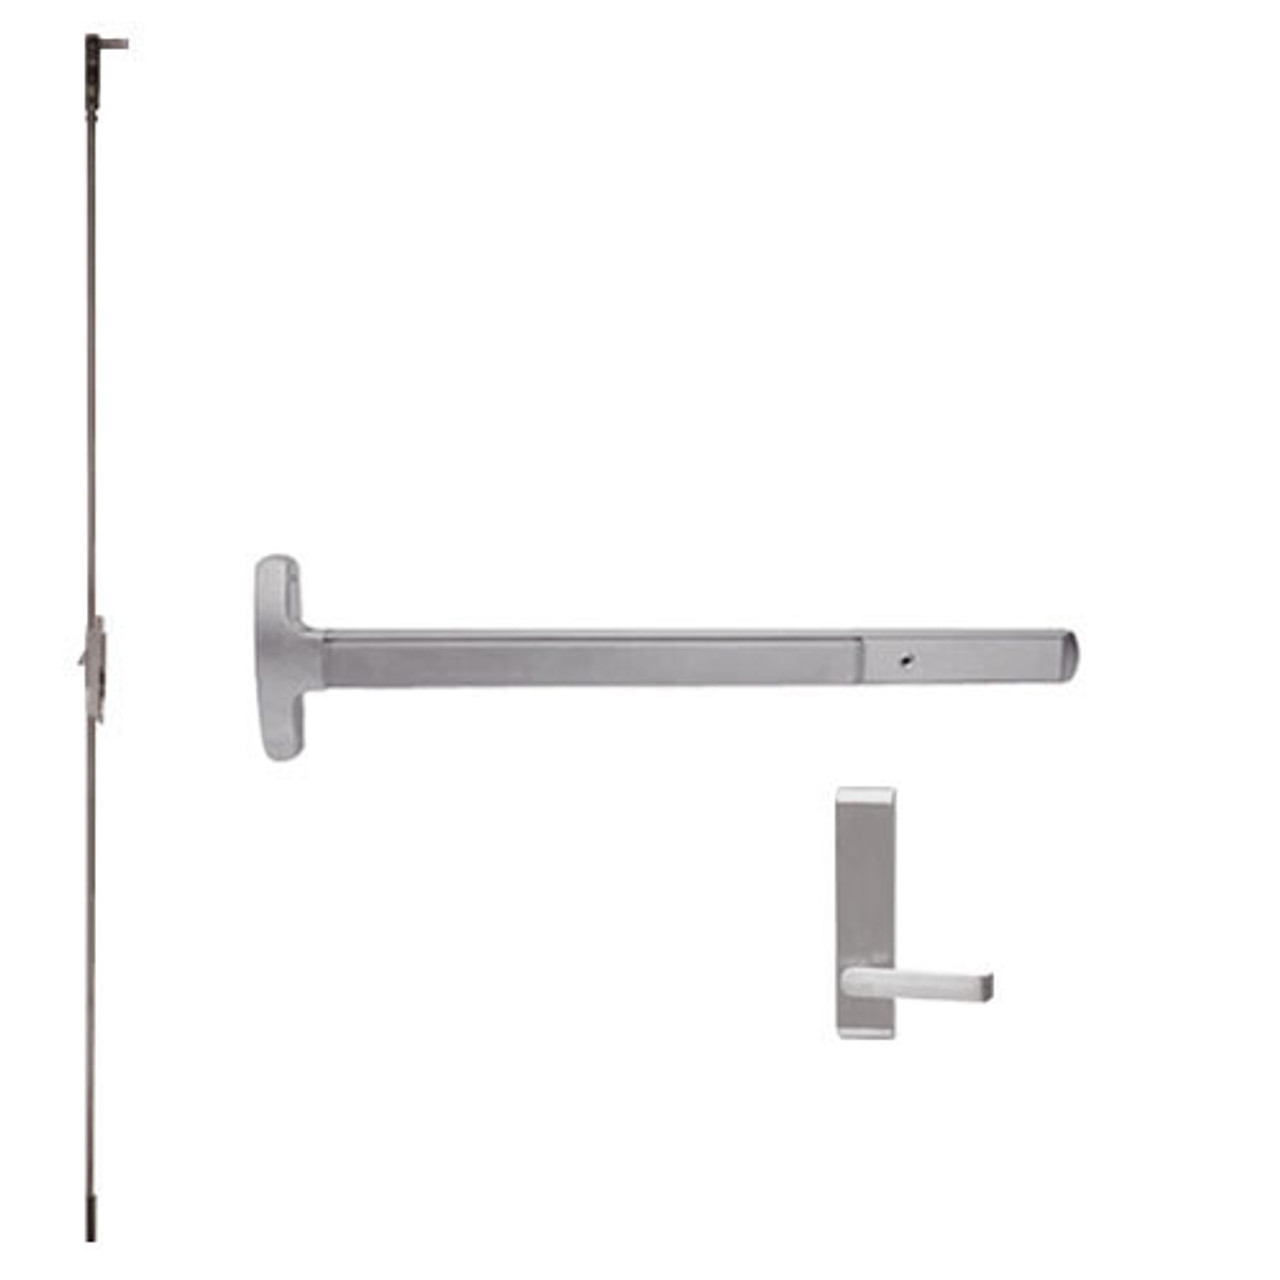 24-C-L-BE-DANE-US32D-3-LHR Falcon Exit Device in Satin Stainless Steel